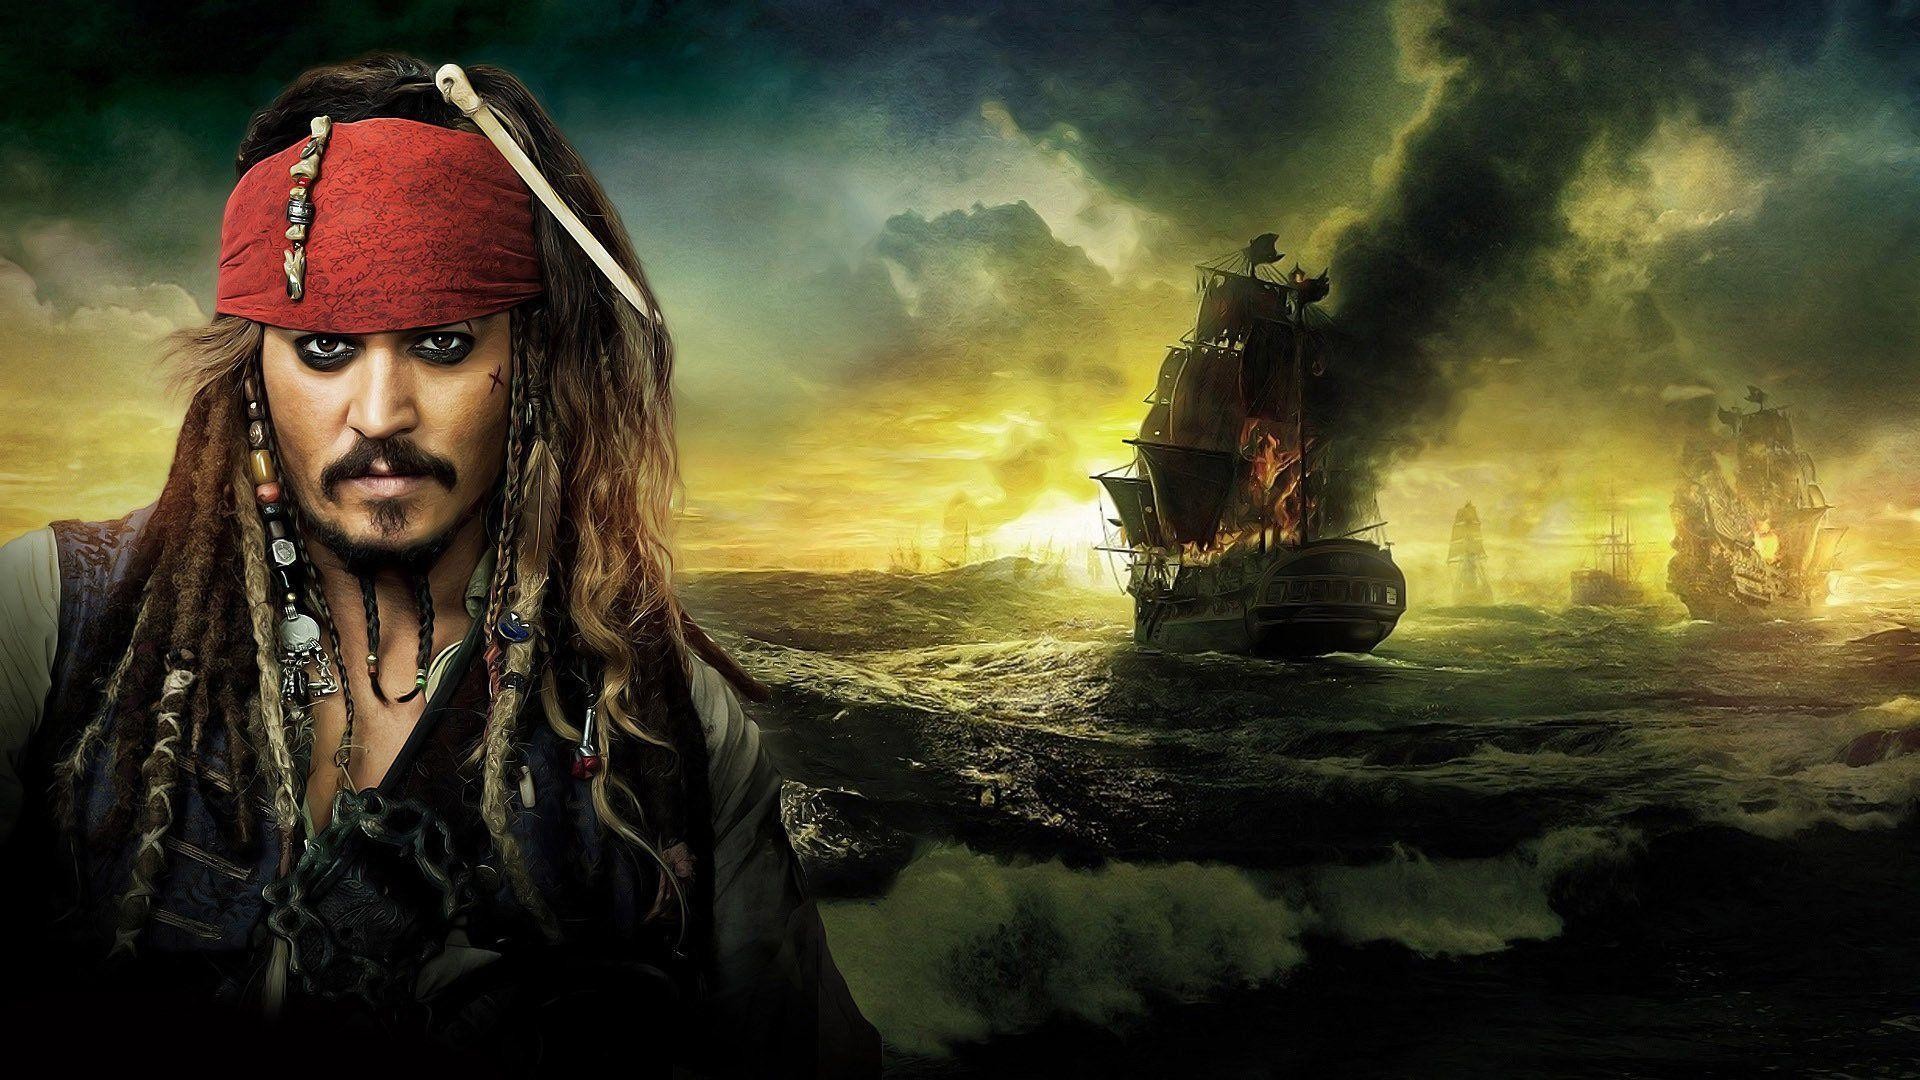 jack sparrow hd wallpaper,action adventure game,cg artwork,adventure game,strategy video game,games